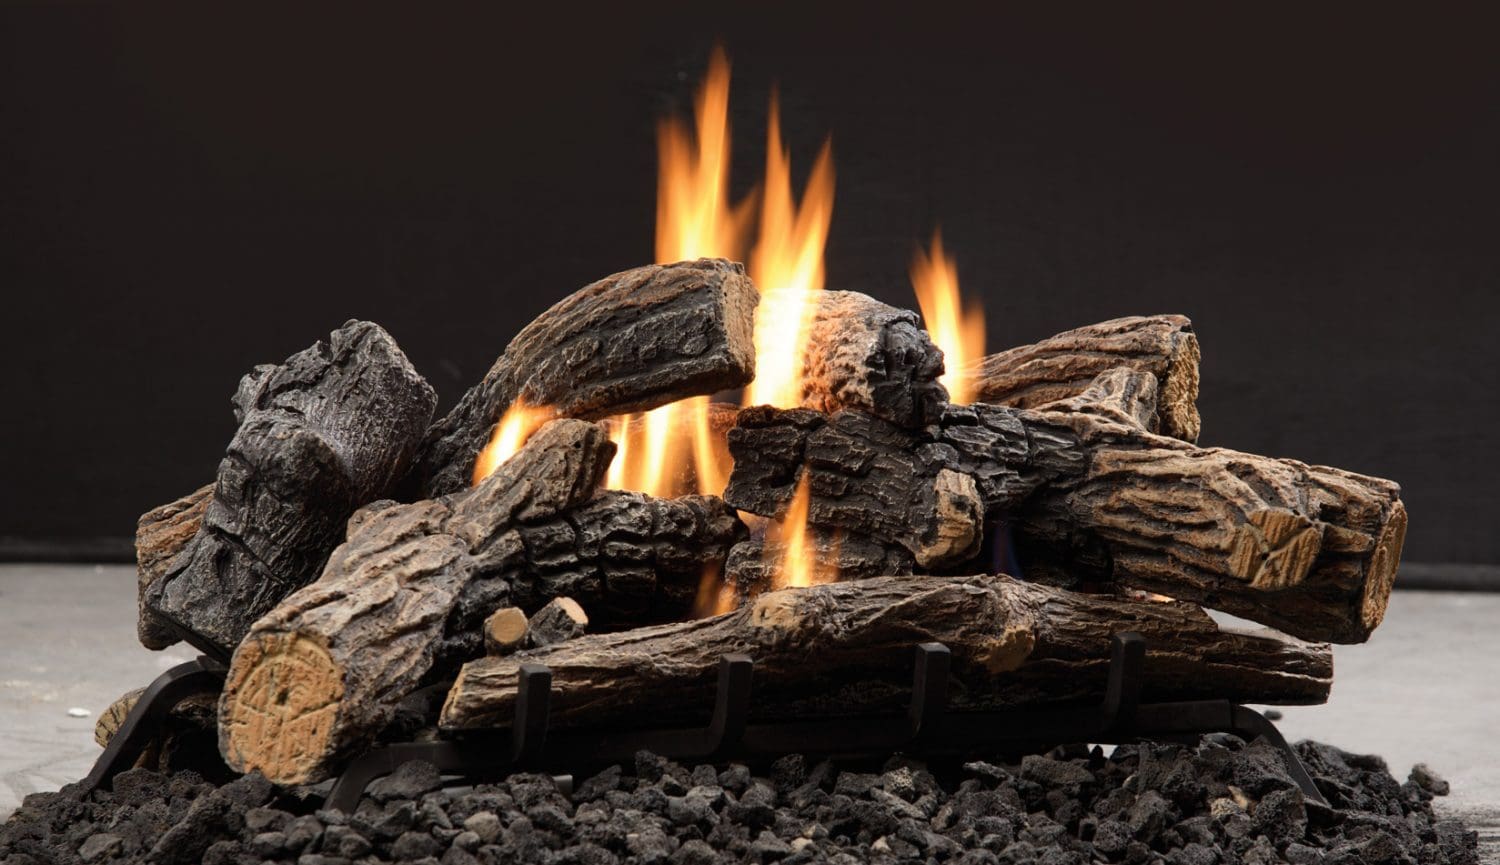 A fire burning in the fireplace of an outdoor room.